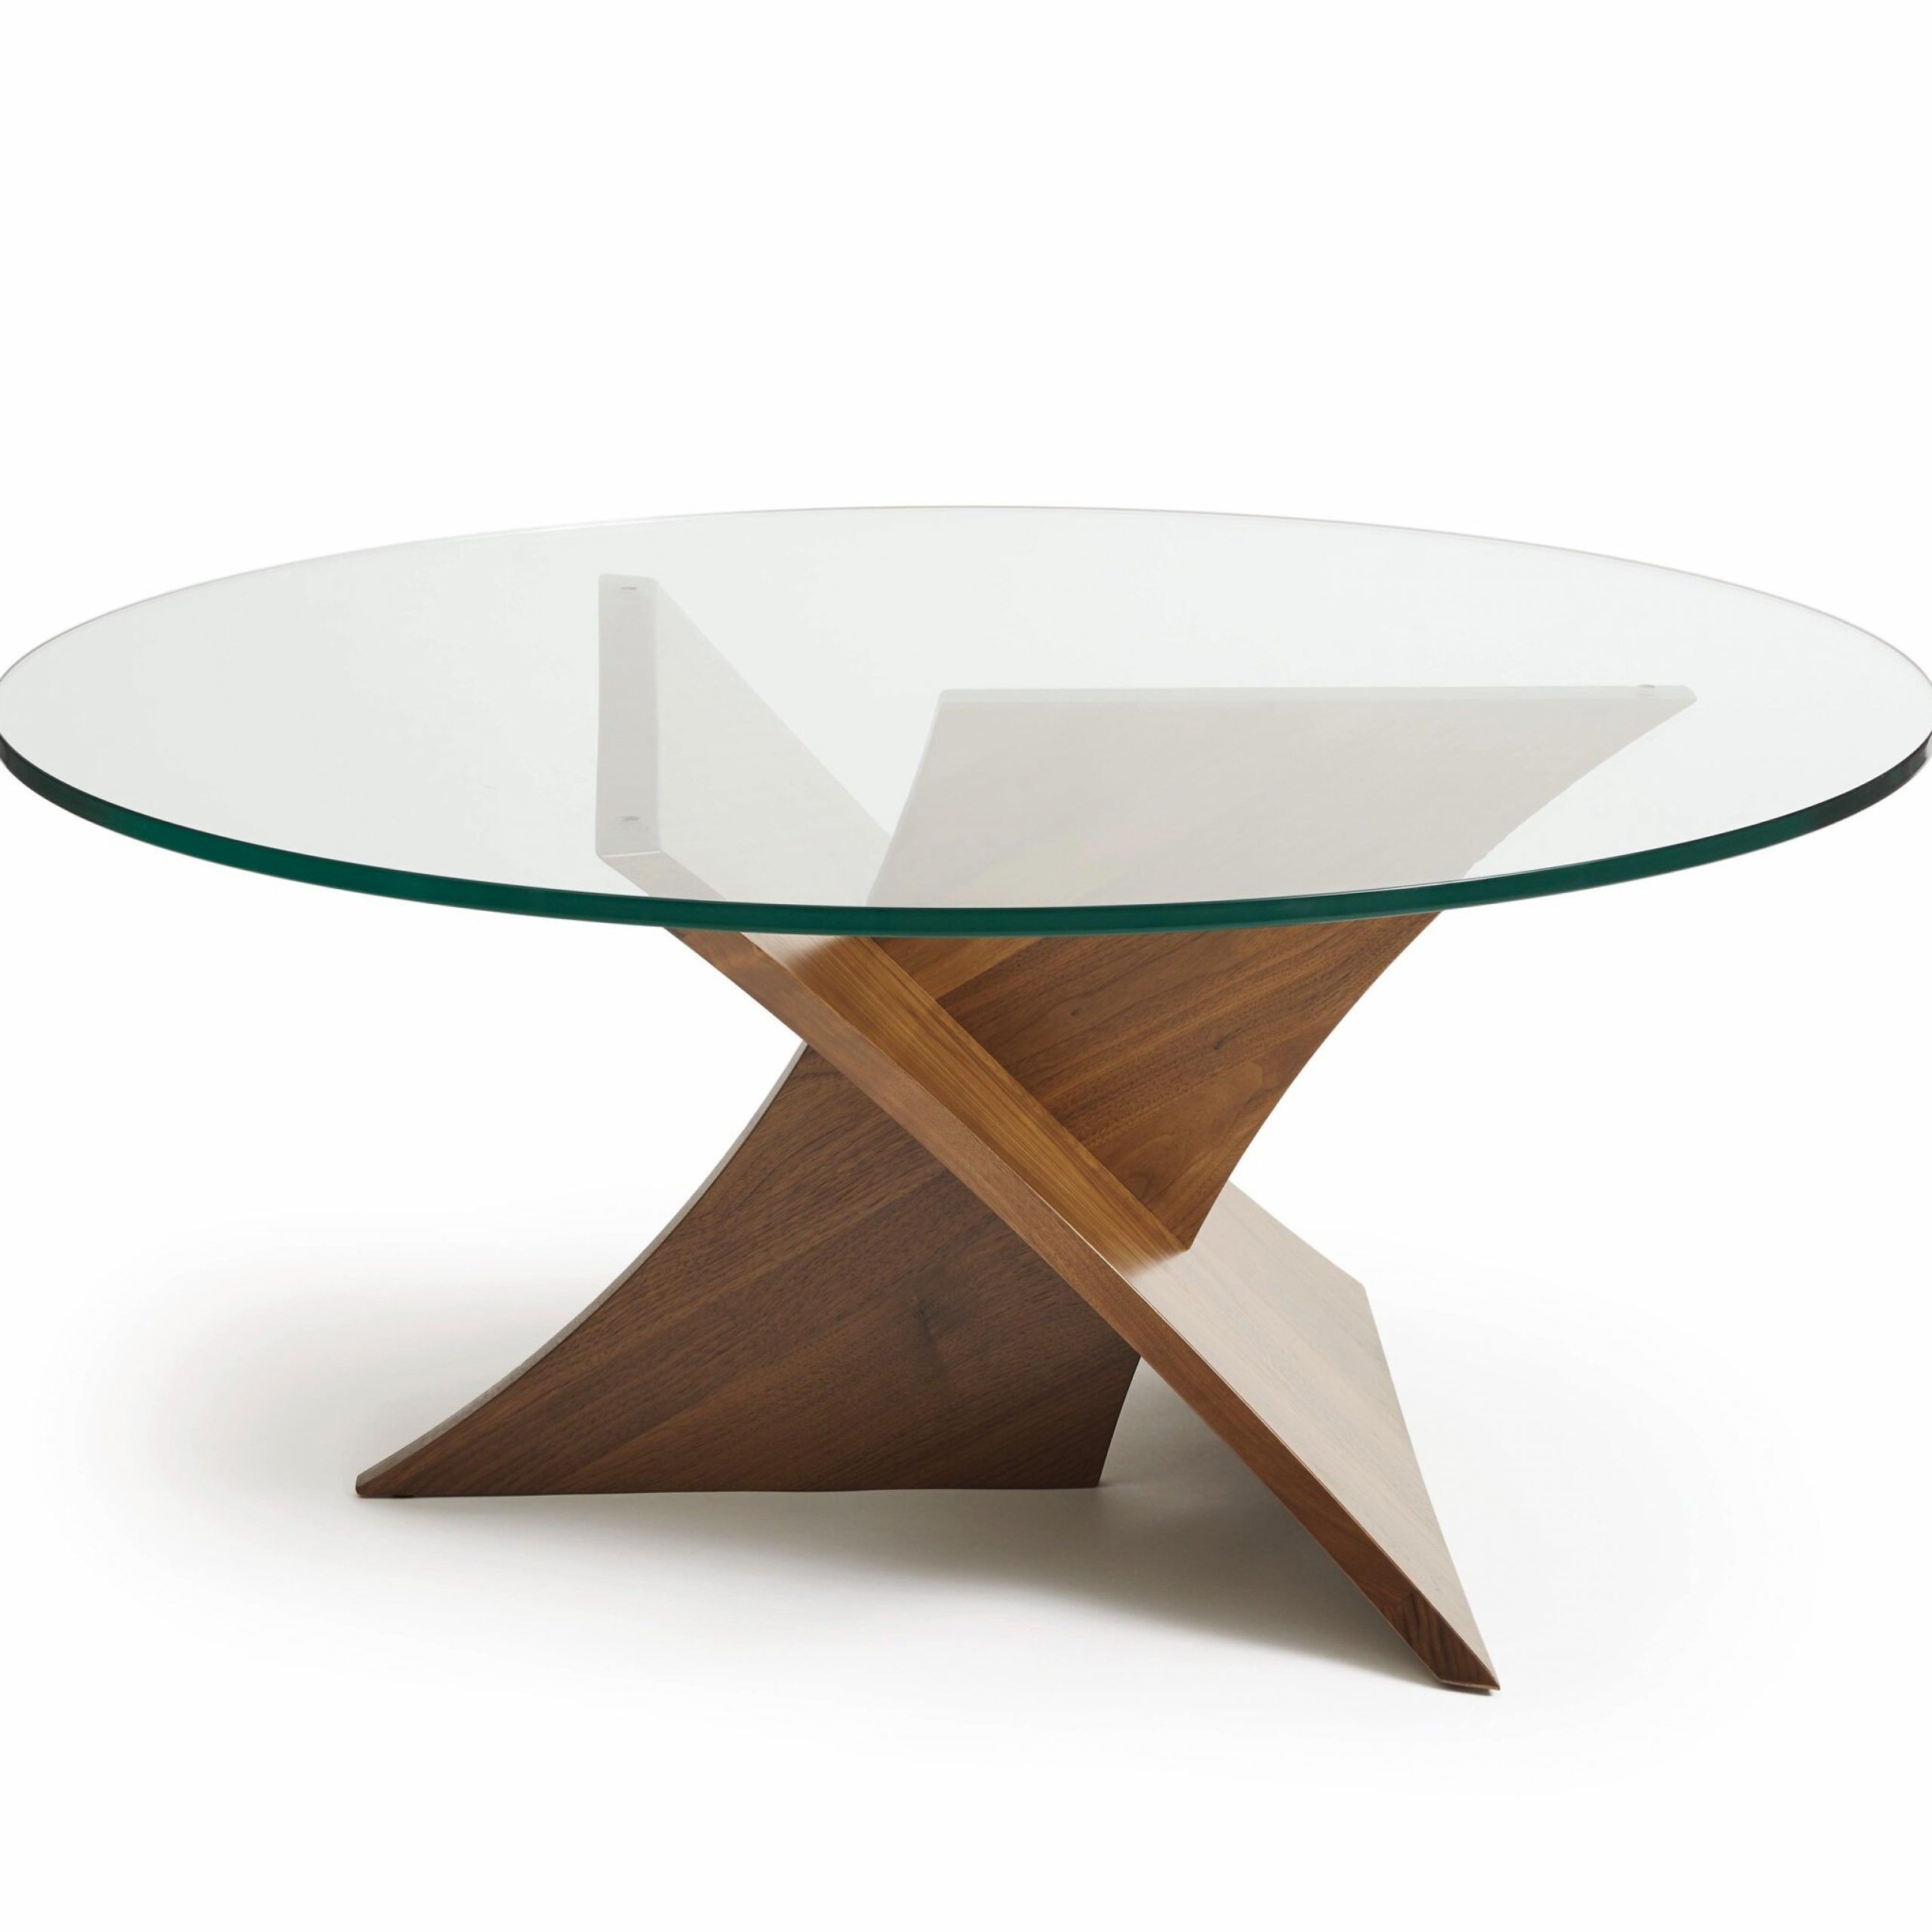 Copeland Furniture Planes Glass Top Coffee Table | Wayfair Pertaining To Smooth Top Coffee Tables (View 2 of 15)